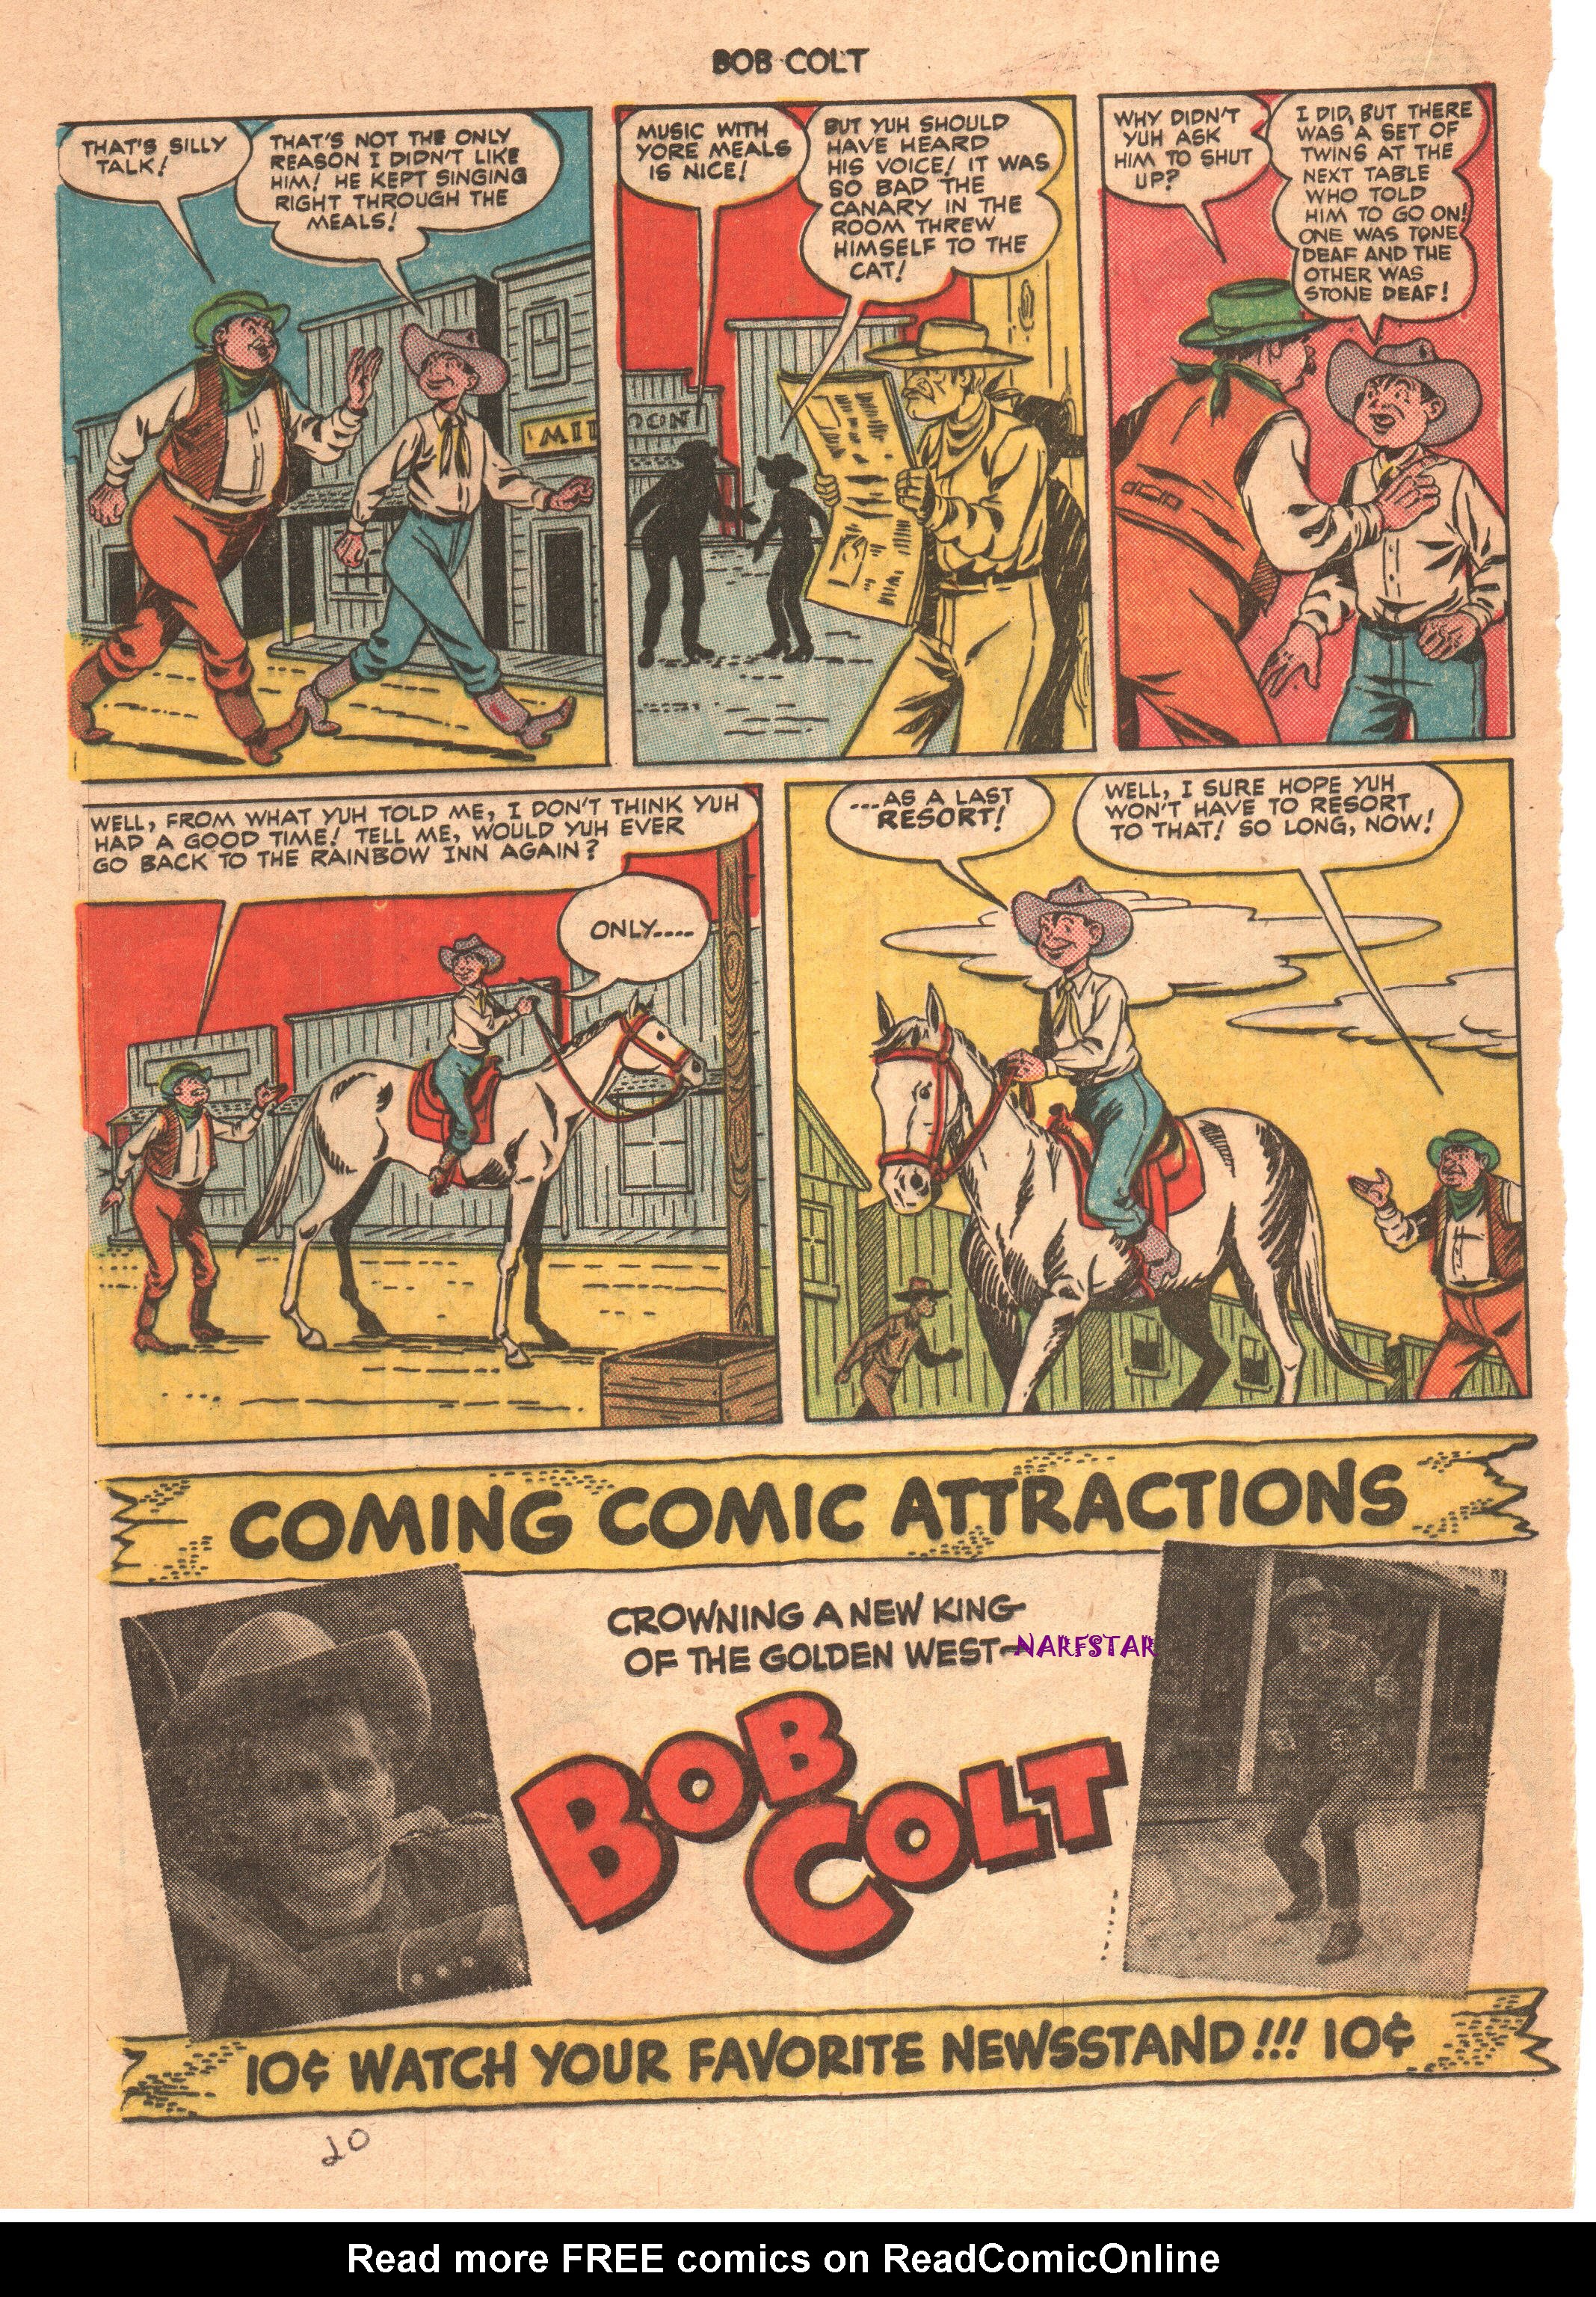 Read online Bob Colt Western comic -  Issue #4 - 20